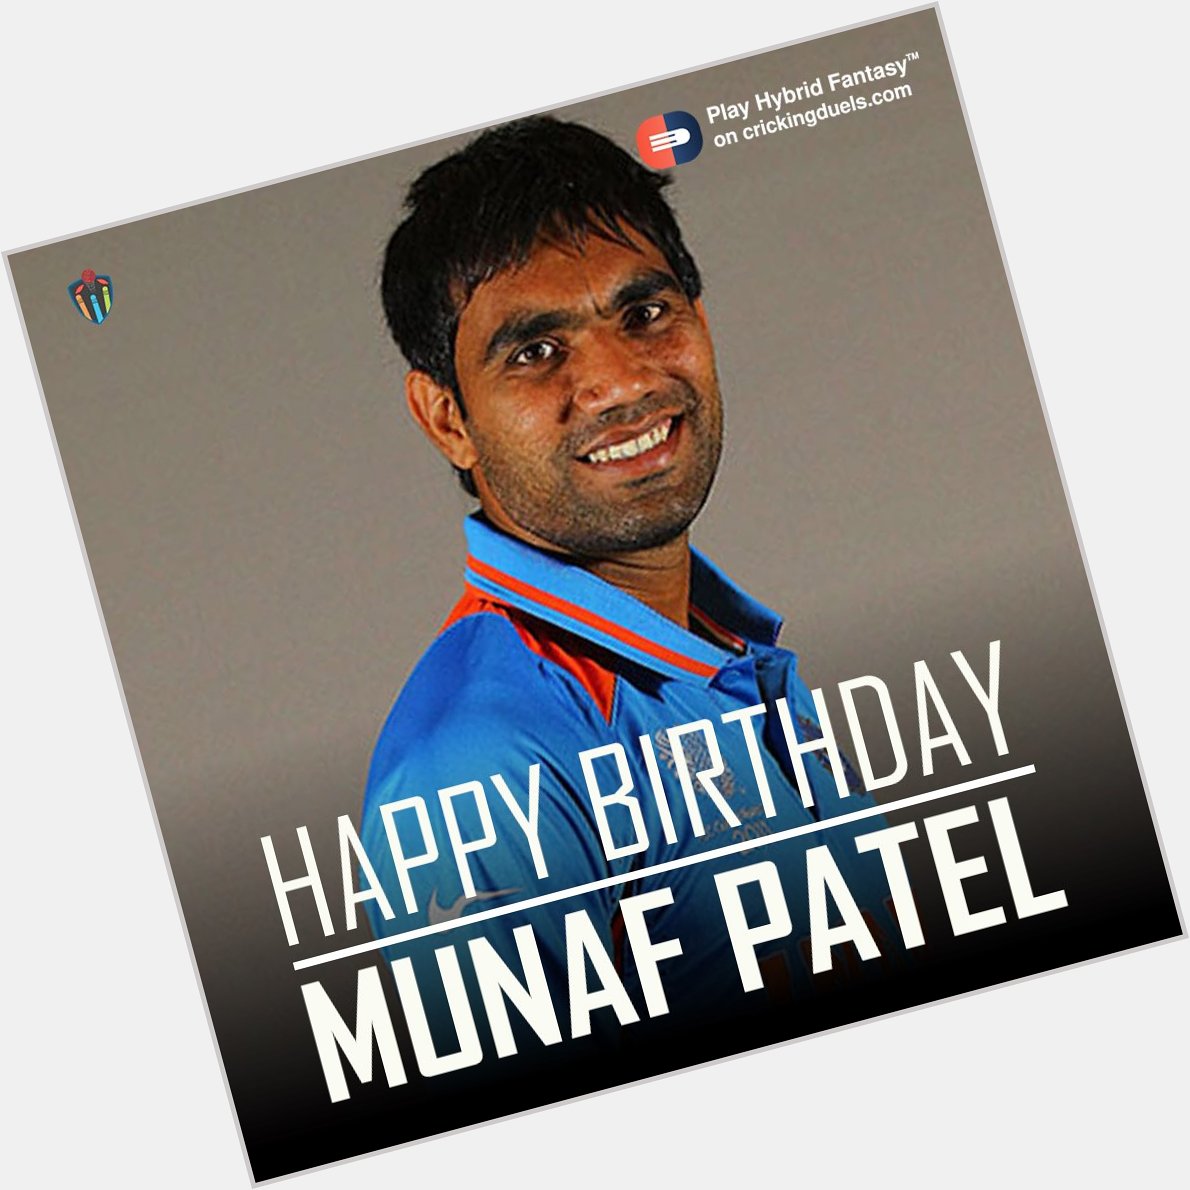 Happy Birthday Munaf Patel. The Indian cricketer turns 34 today. 